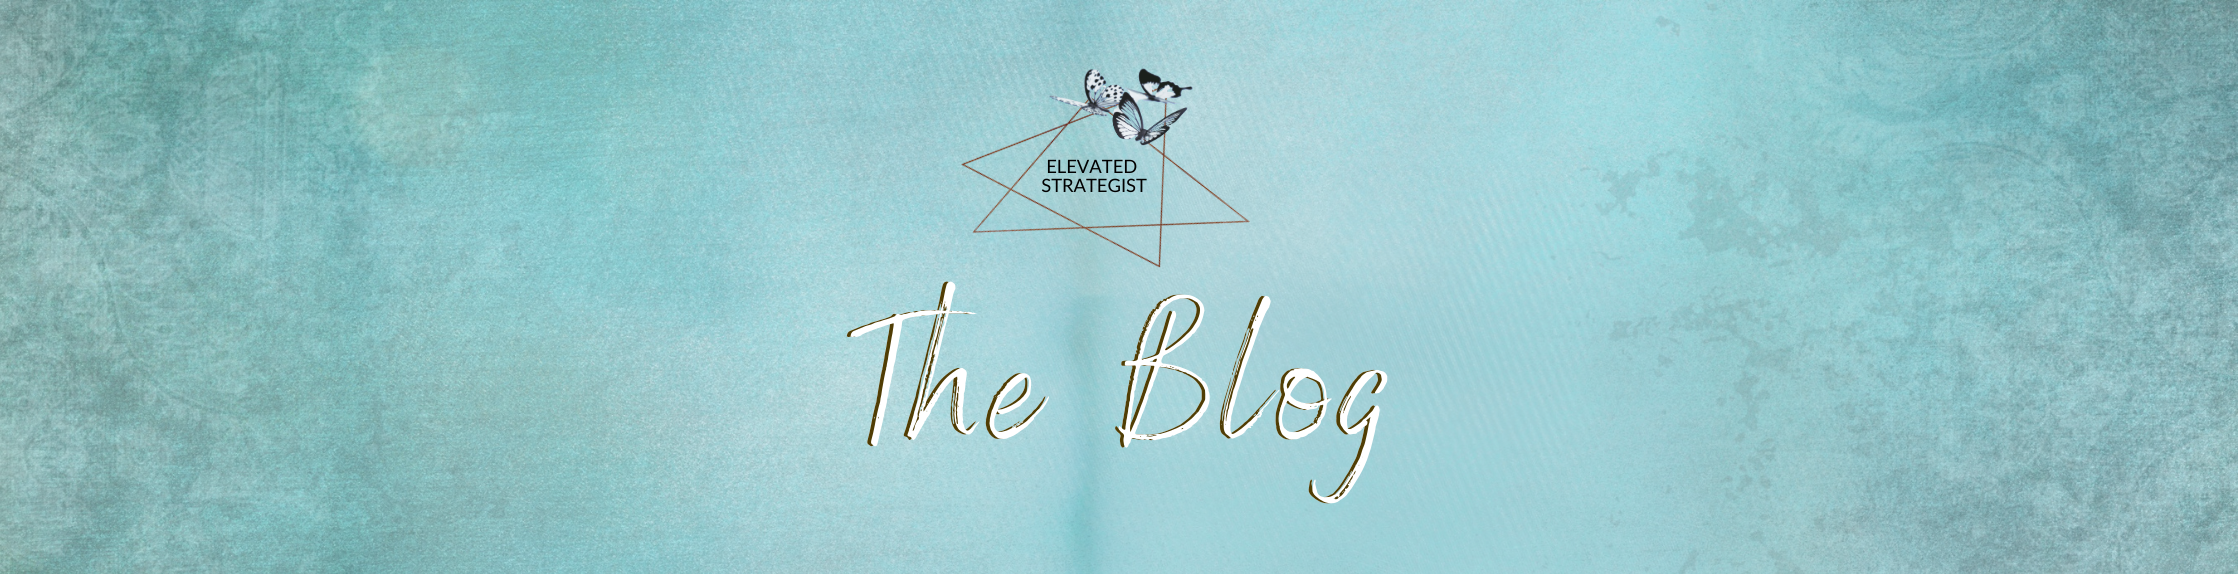 the blog elevated strategist